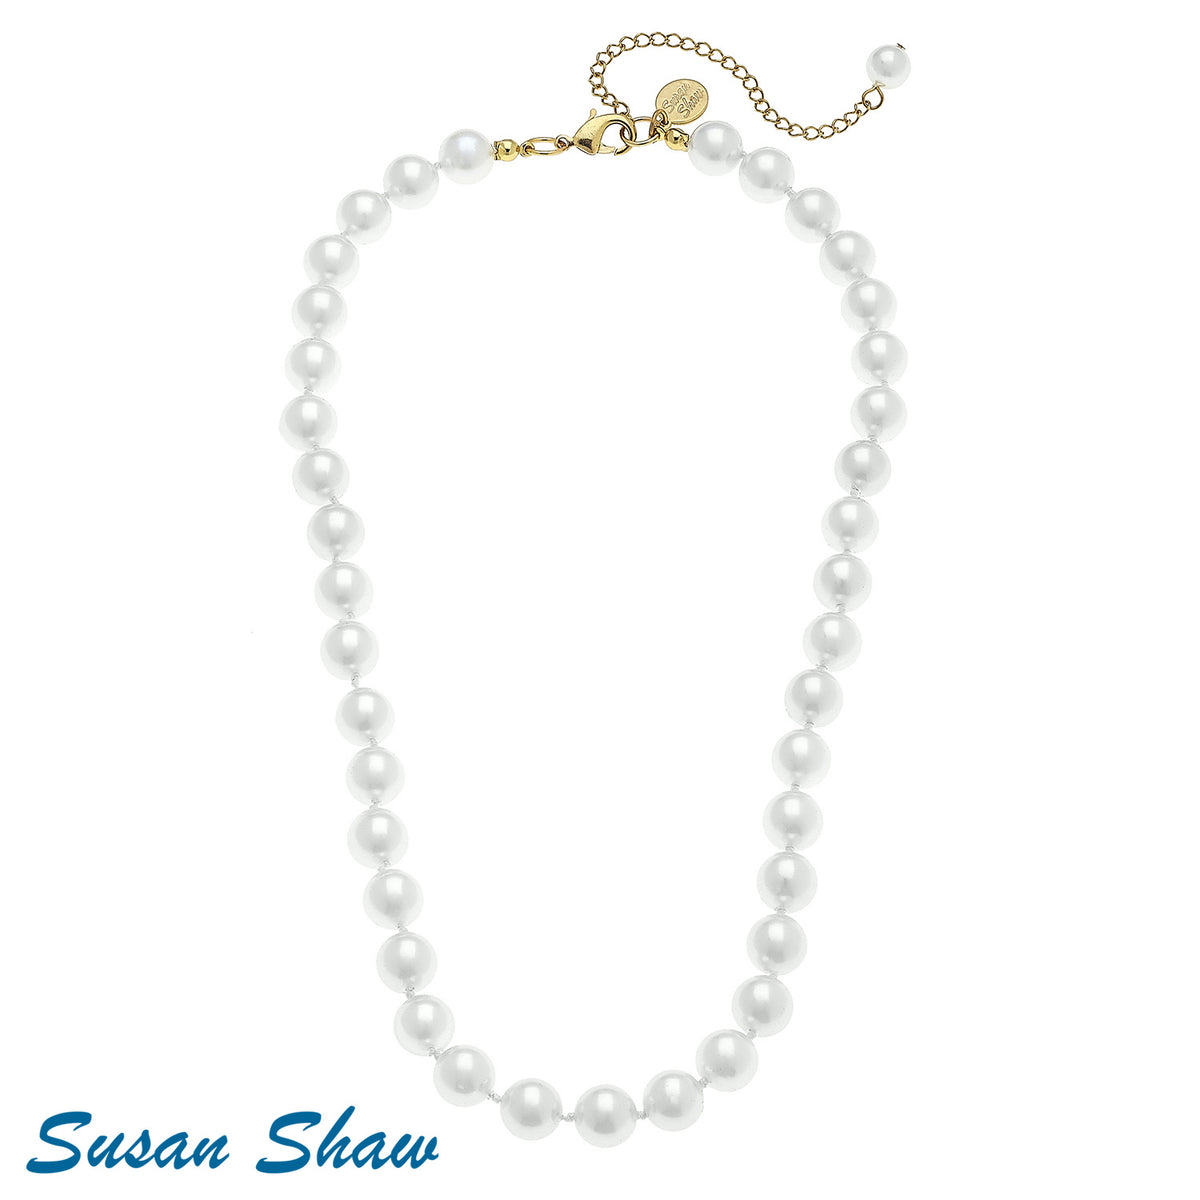 Susan Shaw 18" Handcast Gold Genuine Freshwater Pearl Necklace